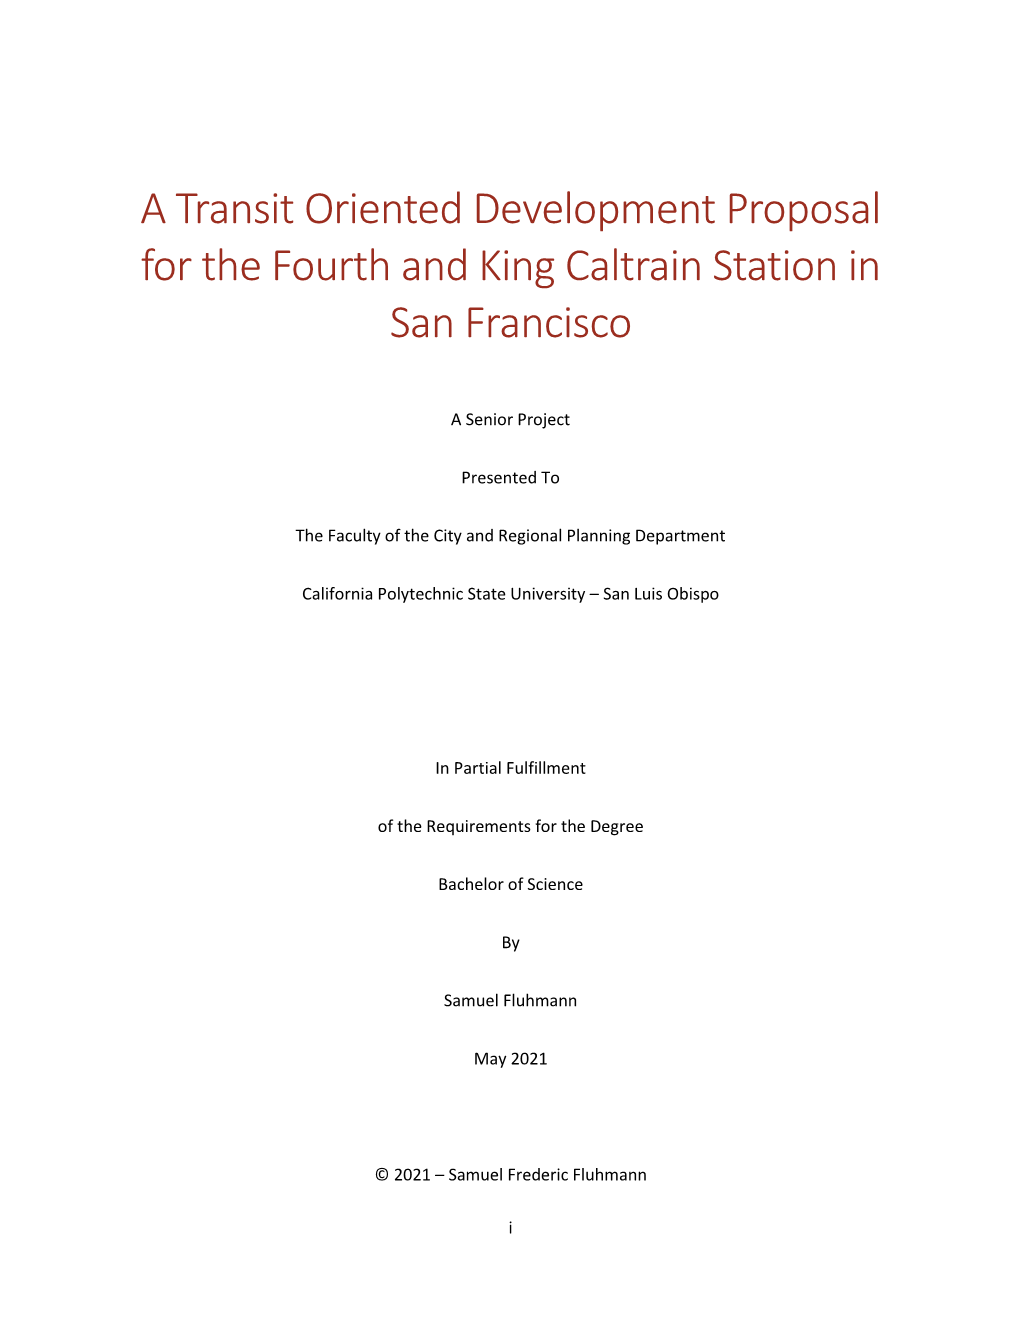 A Transit Oriented Development Proposal for the Fourth and King Caltrain Station in San Francisco